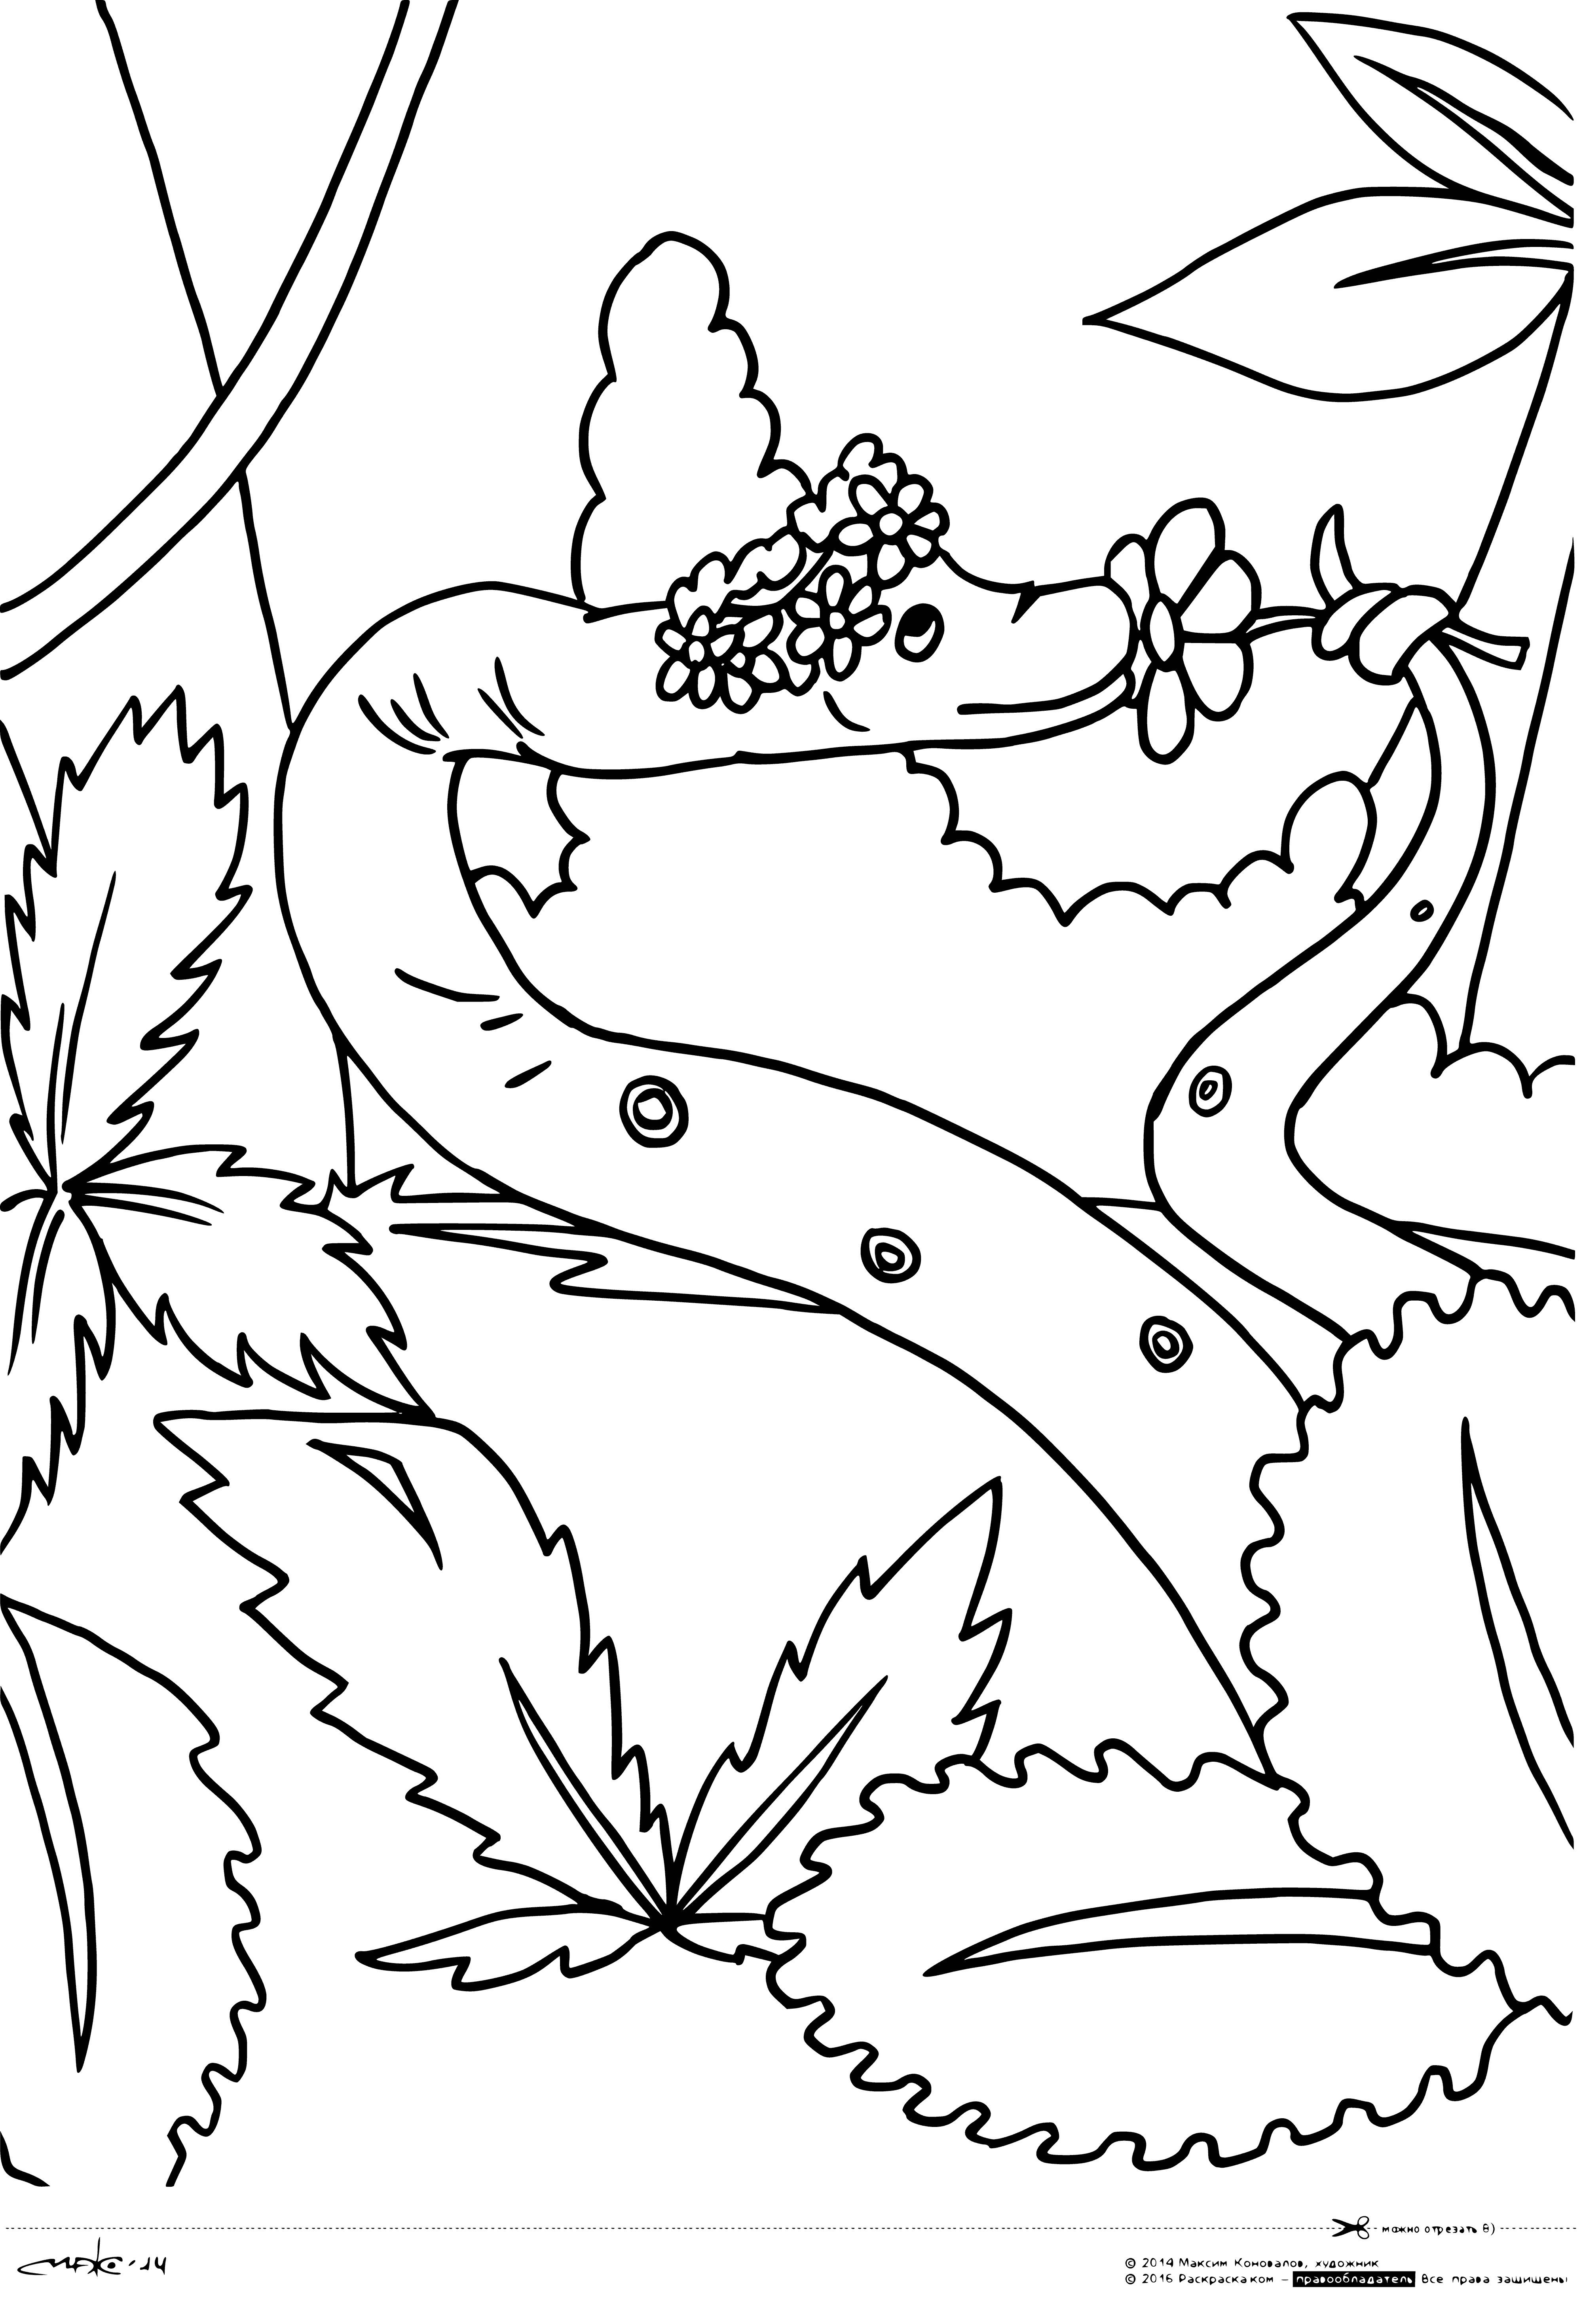 coloring page: Snake coiled around tree branch, head up and mouth open, revealing long, sharp teeth.